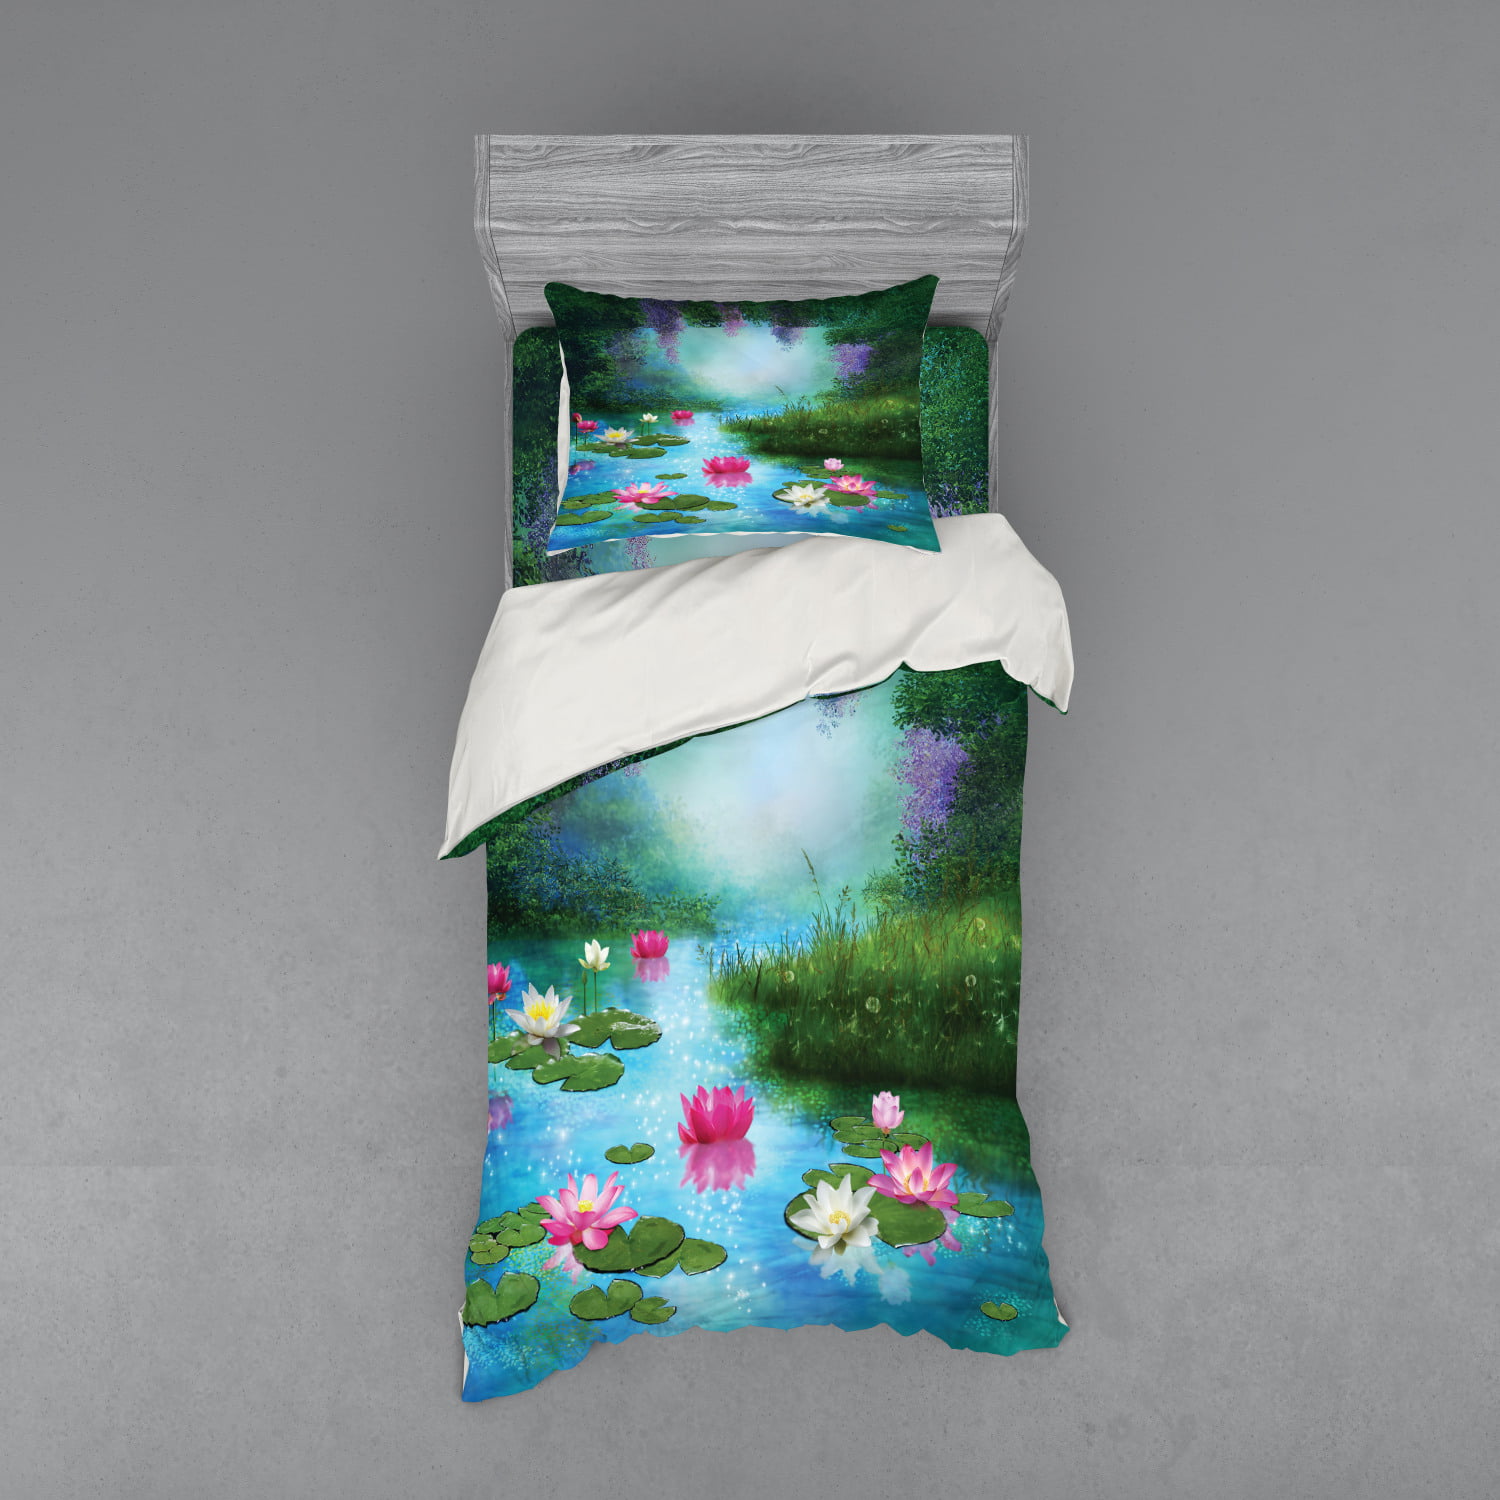 Hotel ZzWwR Fantasy Fairy Tale Pond Water Lilies Floating Romantic Lotus Soft Highly Absorbent Guest Large Home Decorative Hand Towels Multipurpose for Bathroom 16 x 30 Inches Gym and Spa